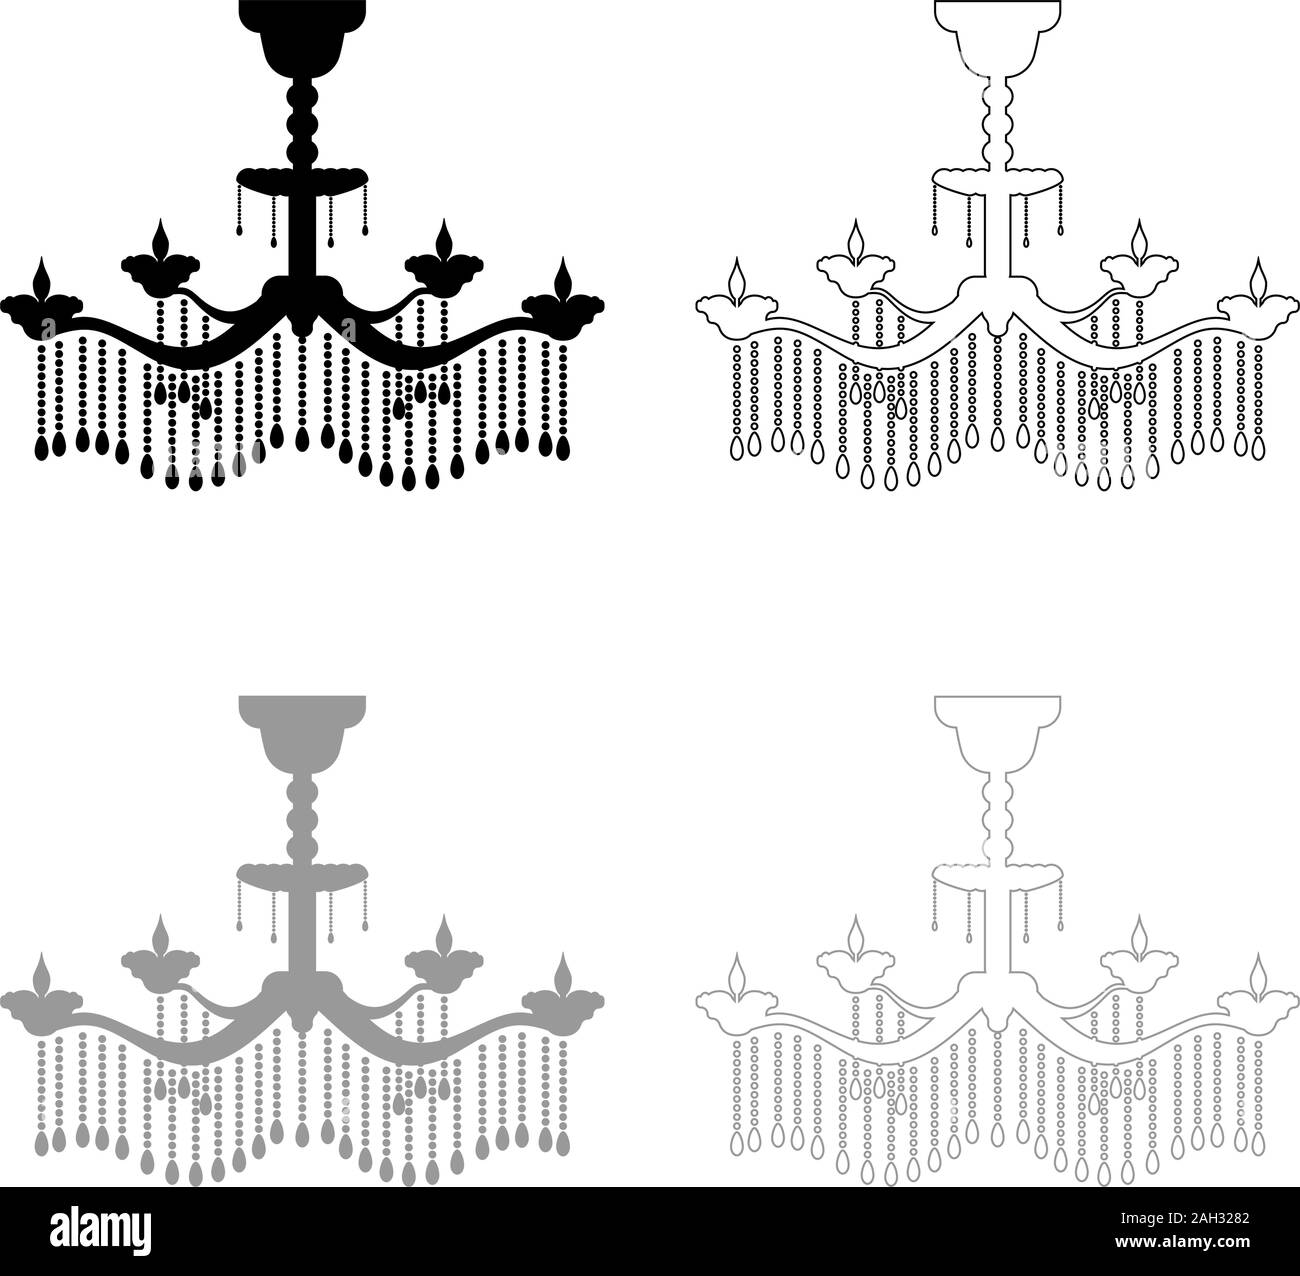 Chandelier icon outline set black grey color vector illustration flat style simple image Stock Vector